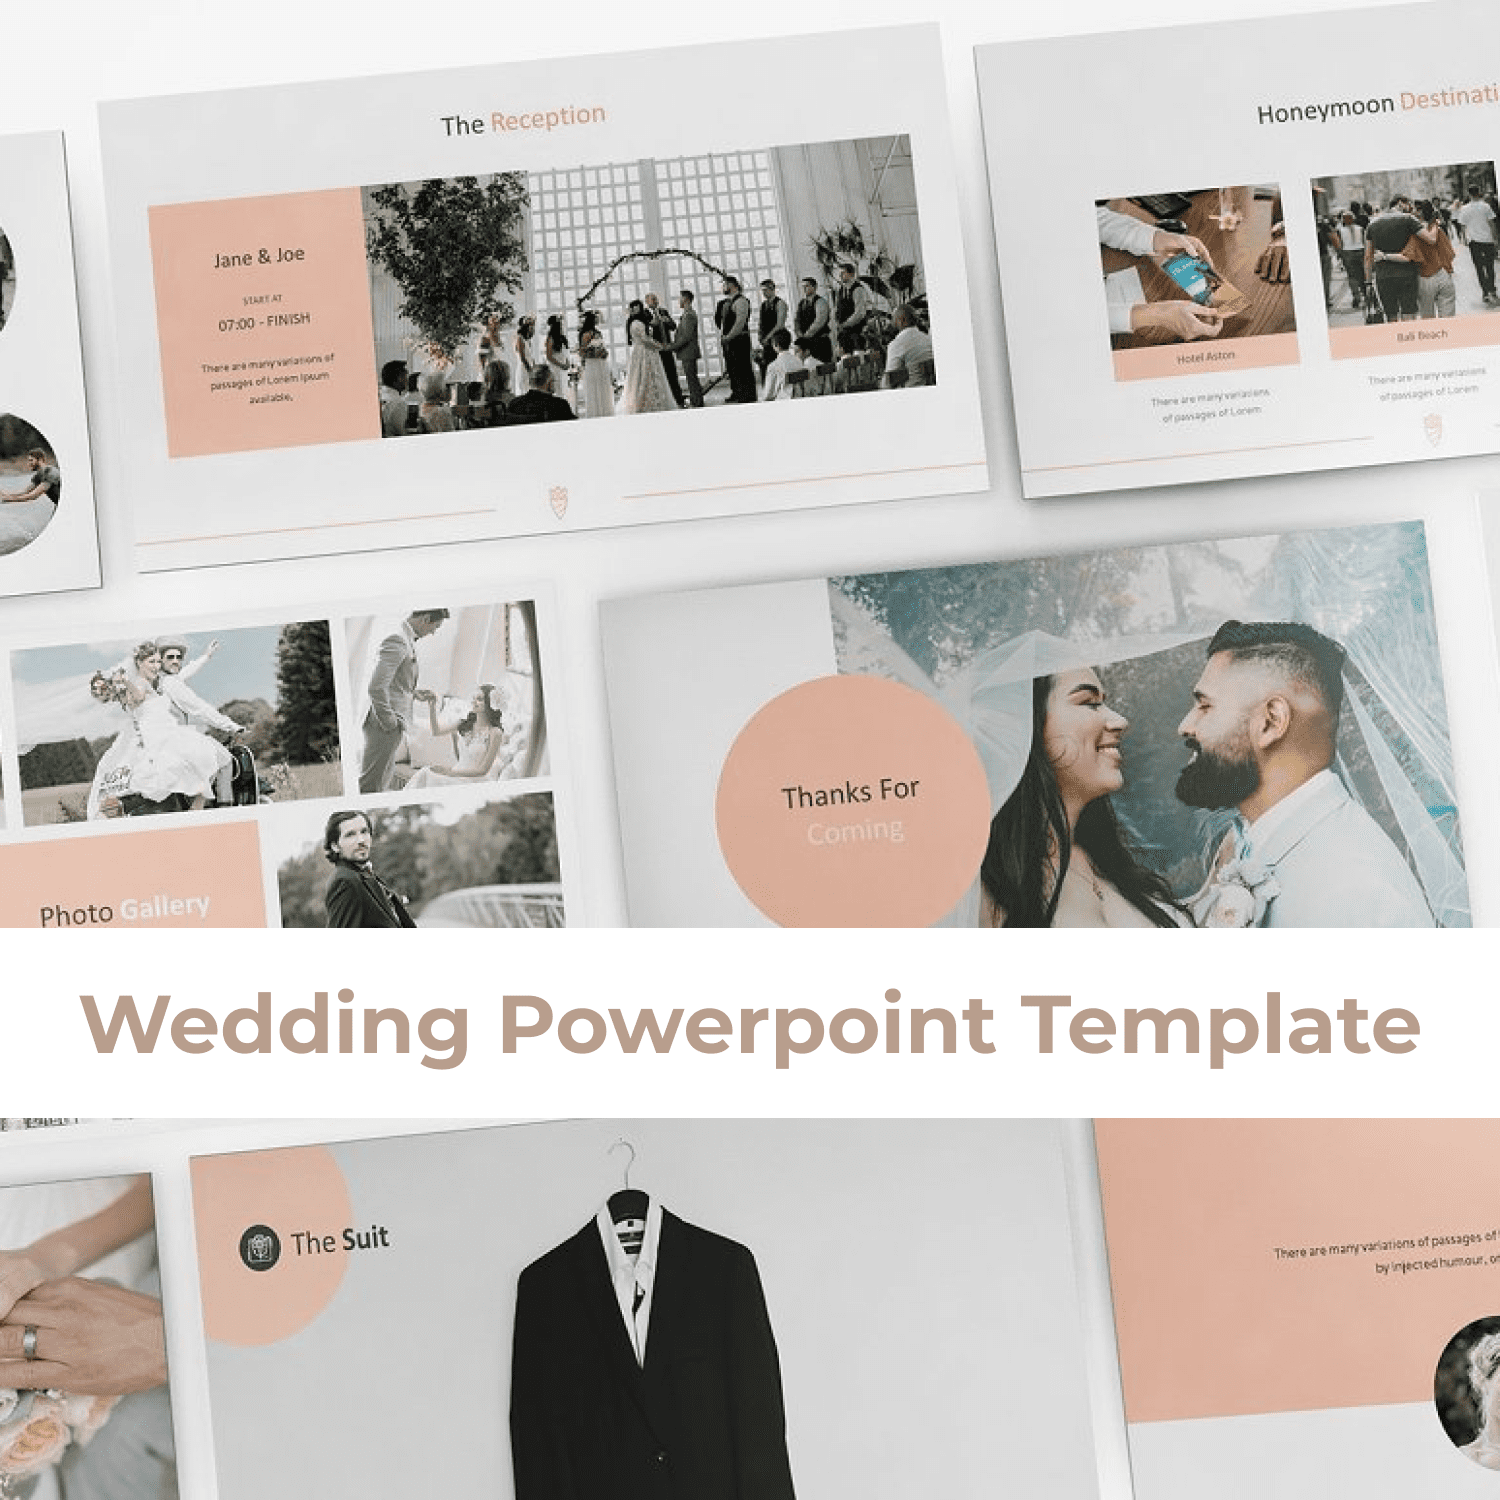 Wedding Powerpoint Template cover.